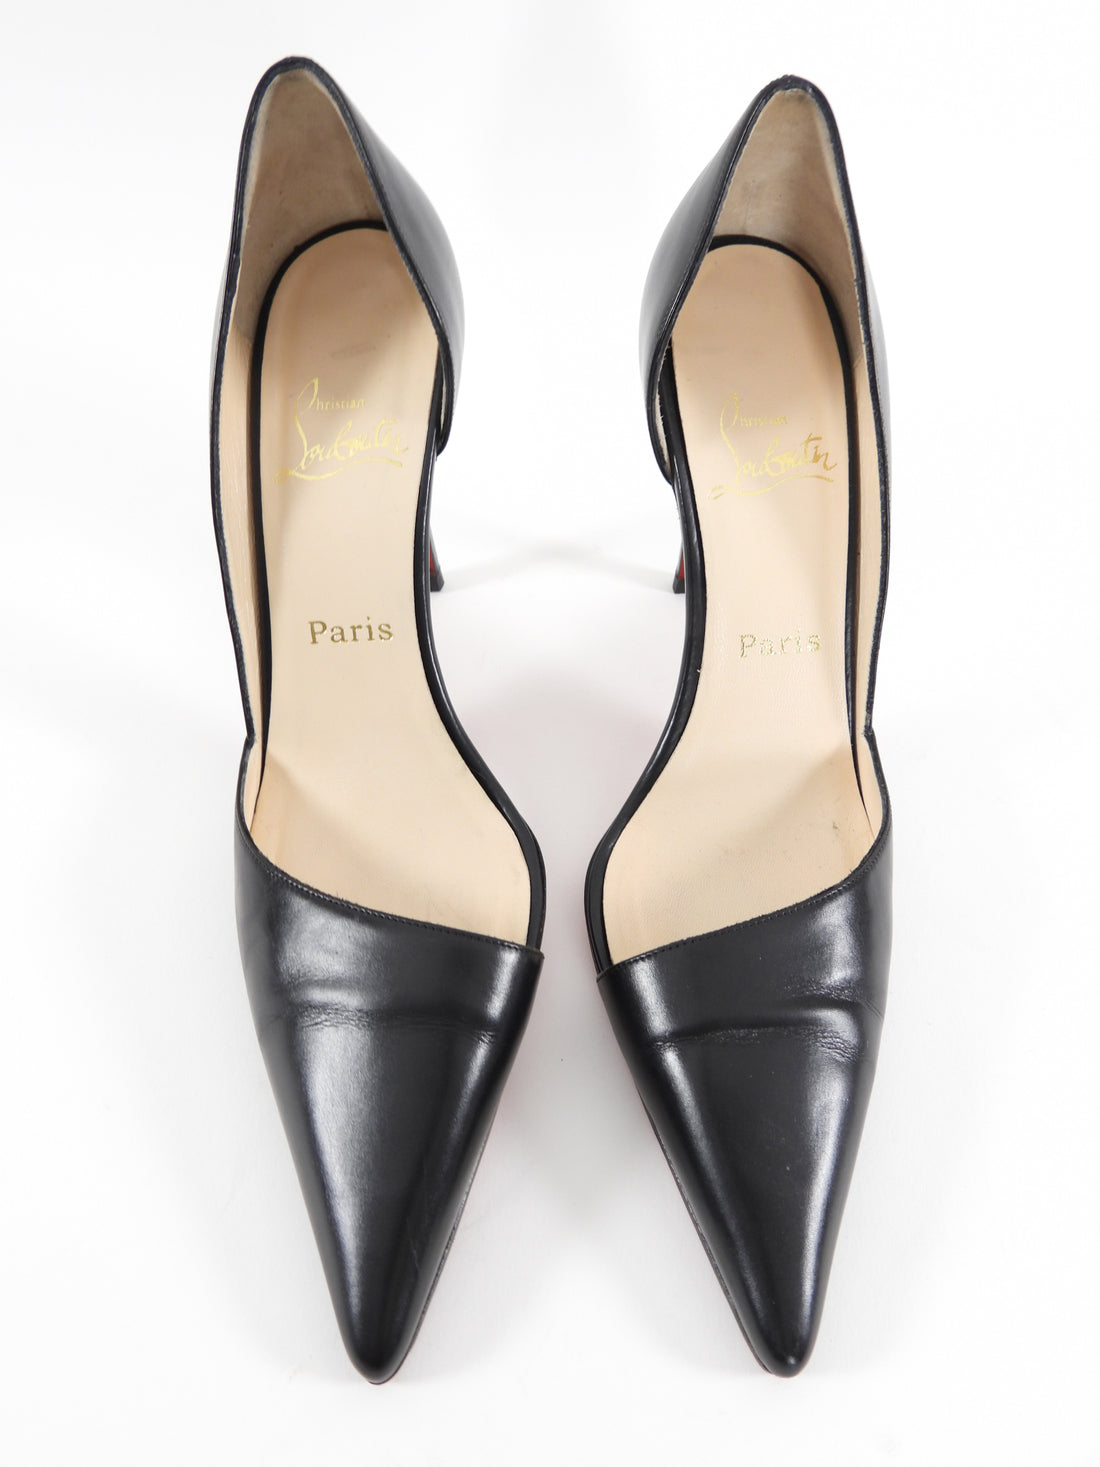 Louboutin Black Smooth Leather D'Orsay Pumps - 40 / 10